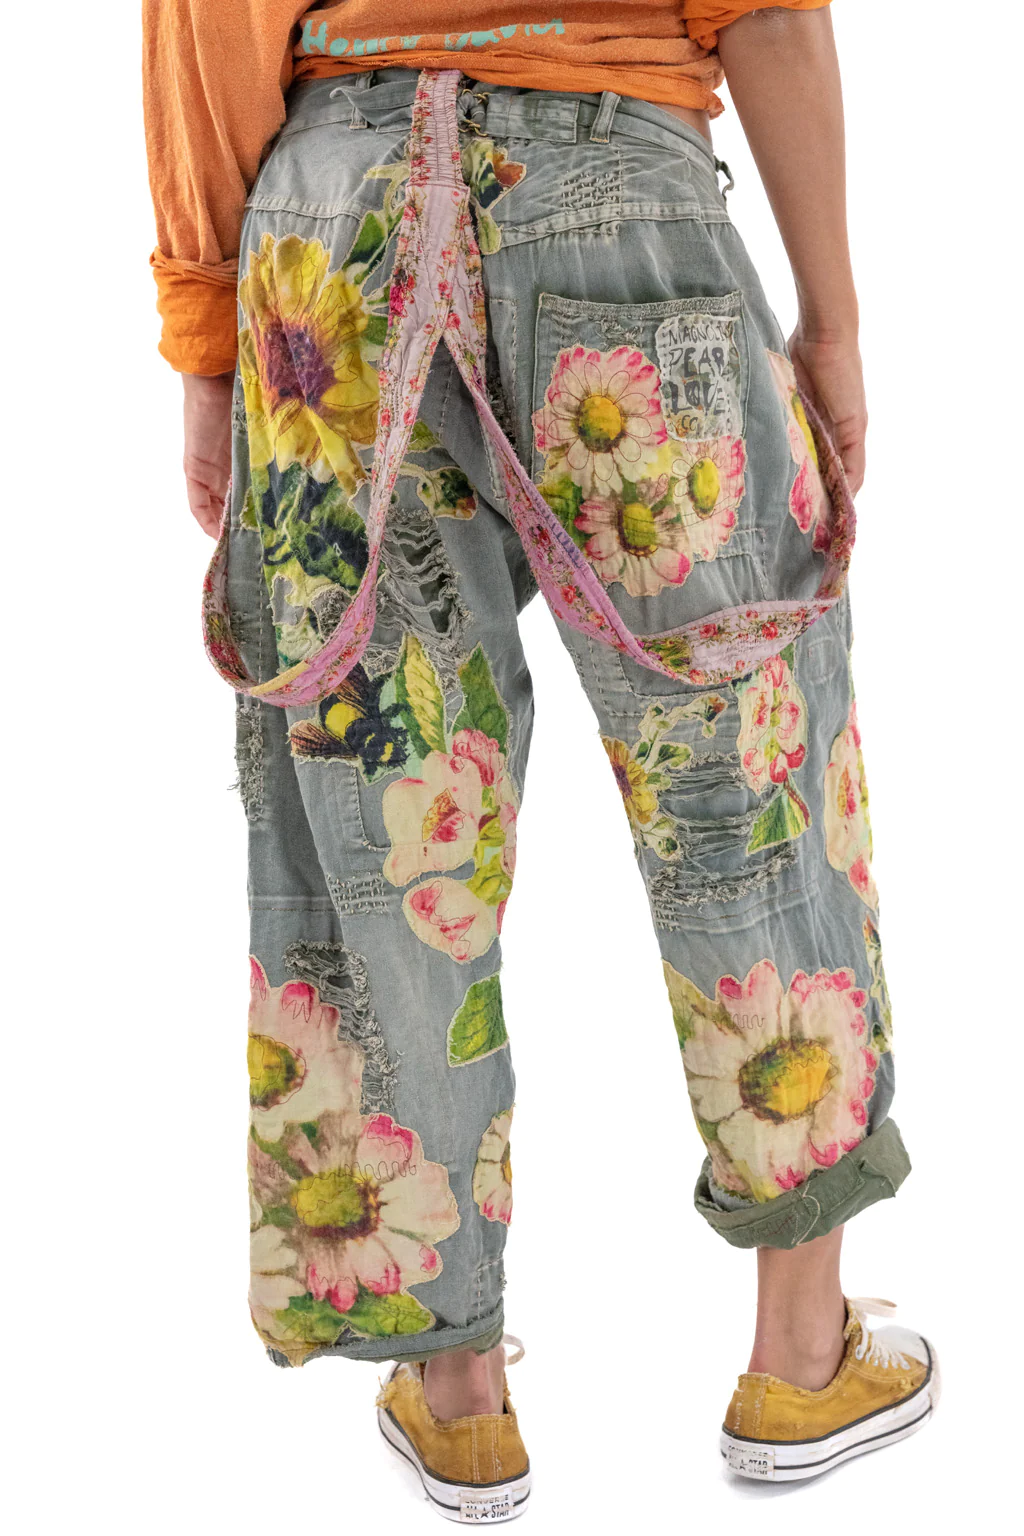 Magnolia Pearl Cotton Twill Miner Pants with Sunflower Applique